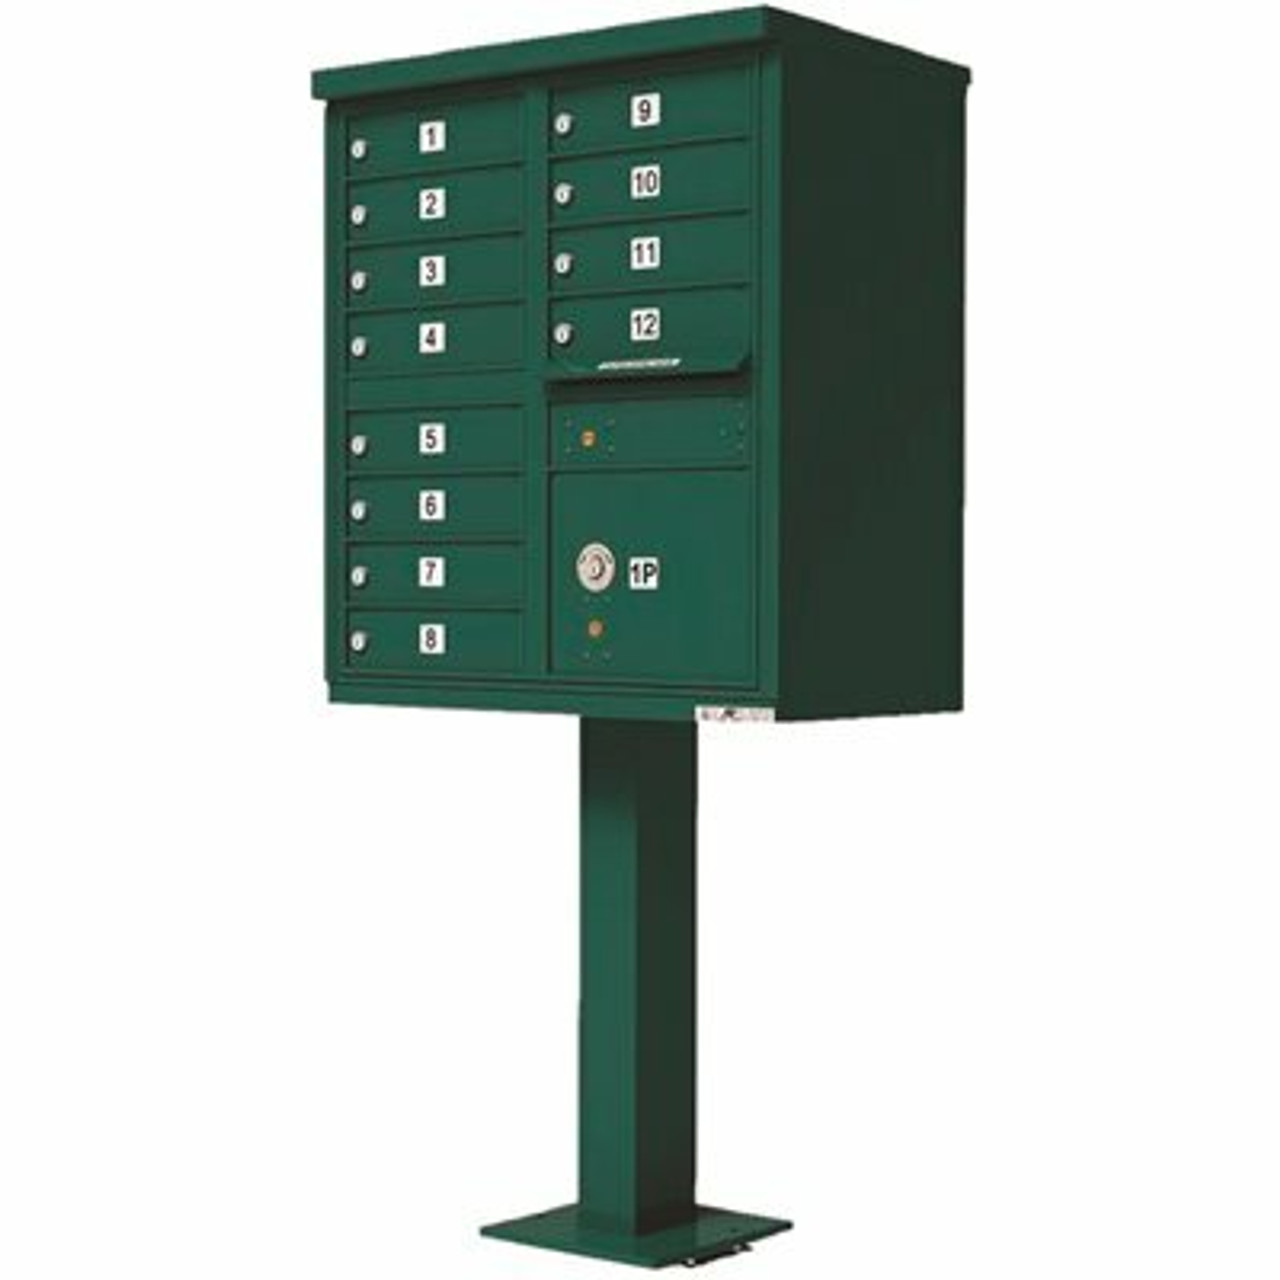 Florence Vital 1570 12-Mailboxes 1-Parcel Locker 1-Outgoing Mail Compartment Forest Green Cbu